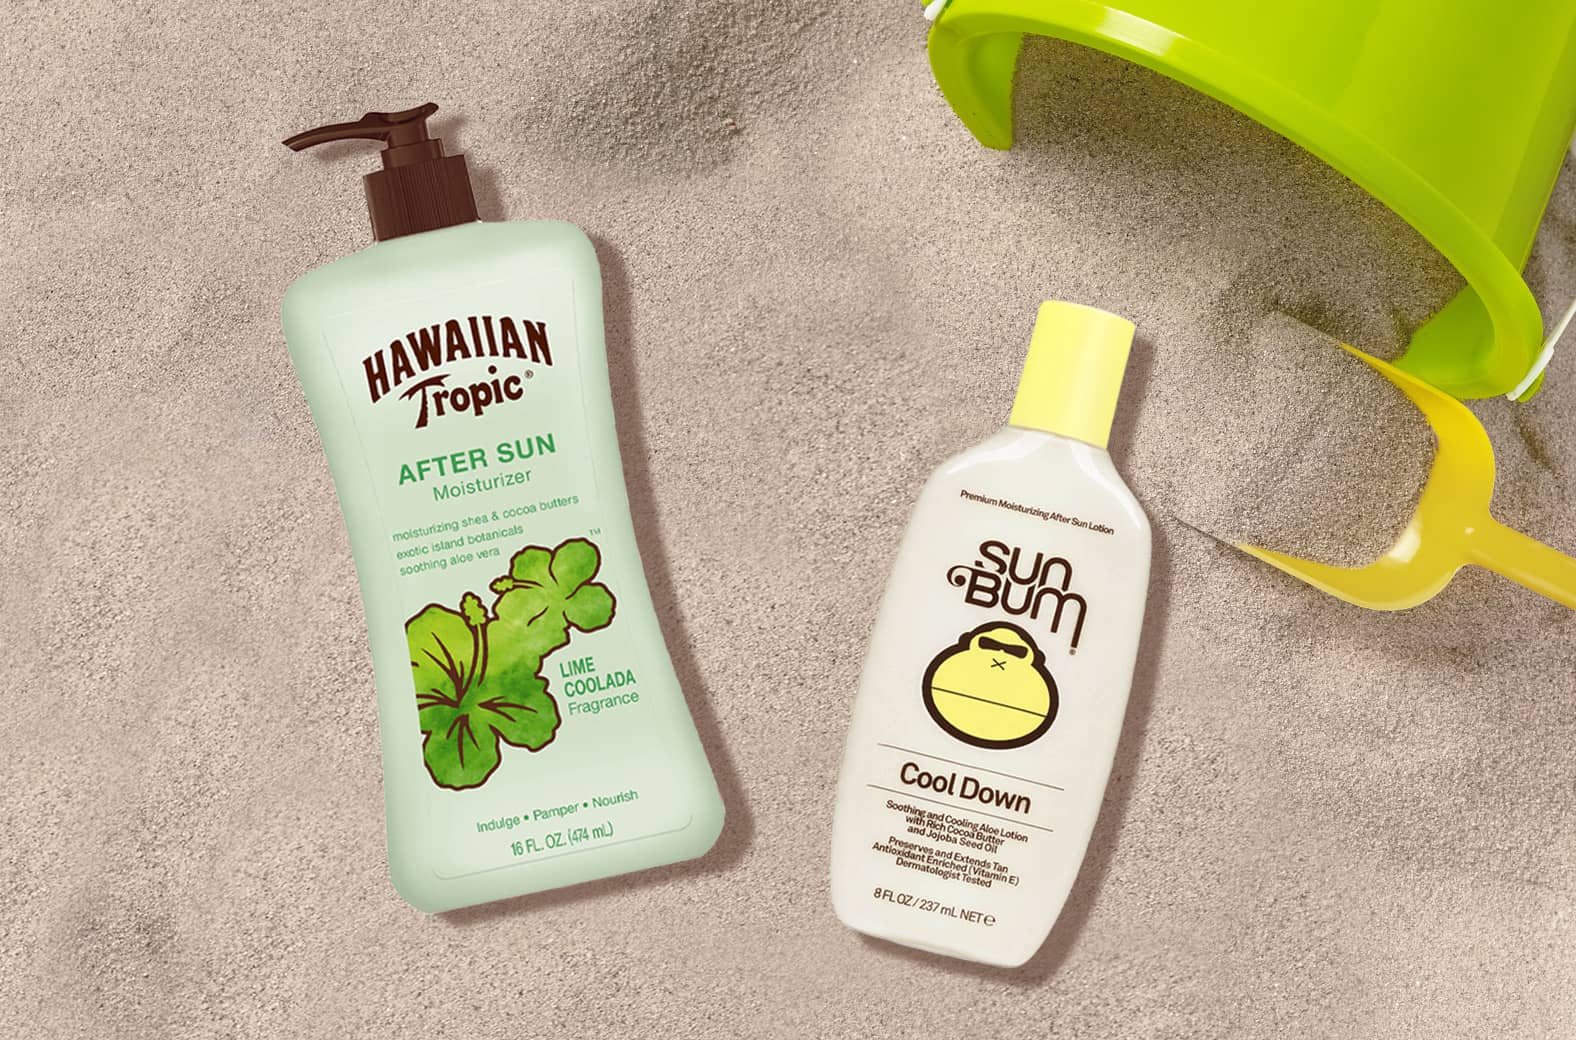 Hawaiian Tropic and SunBum after-sun care products